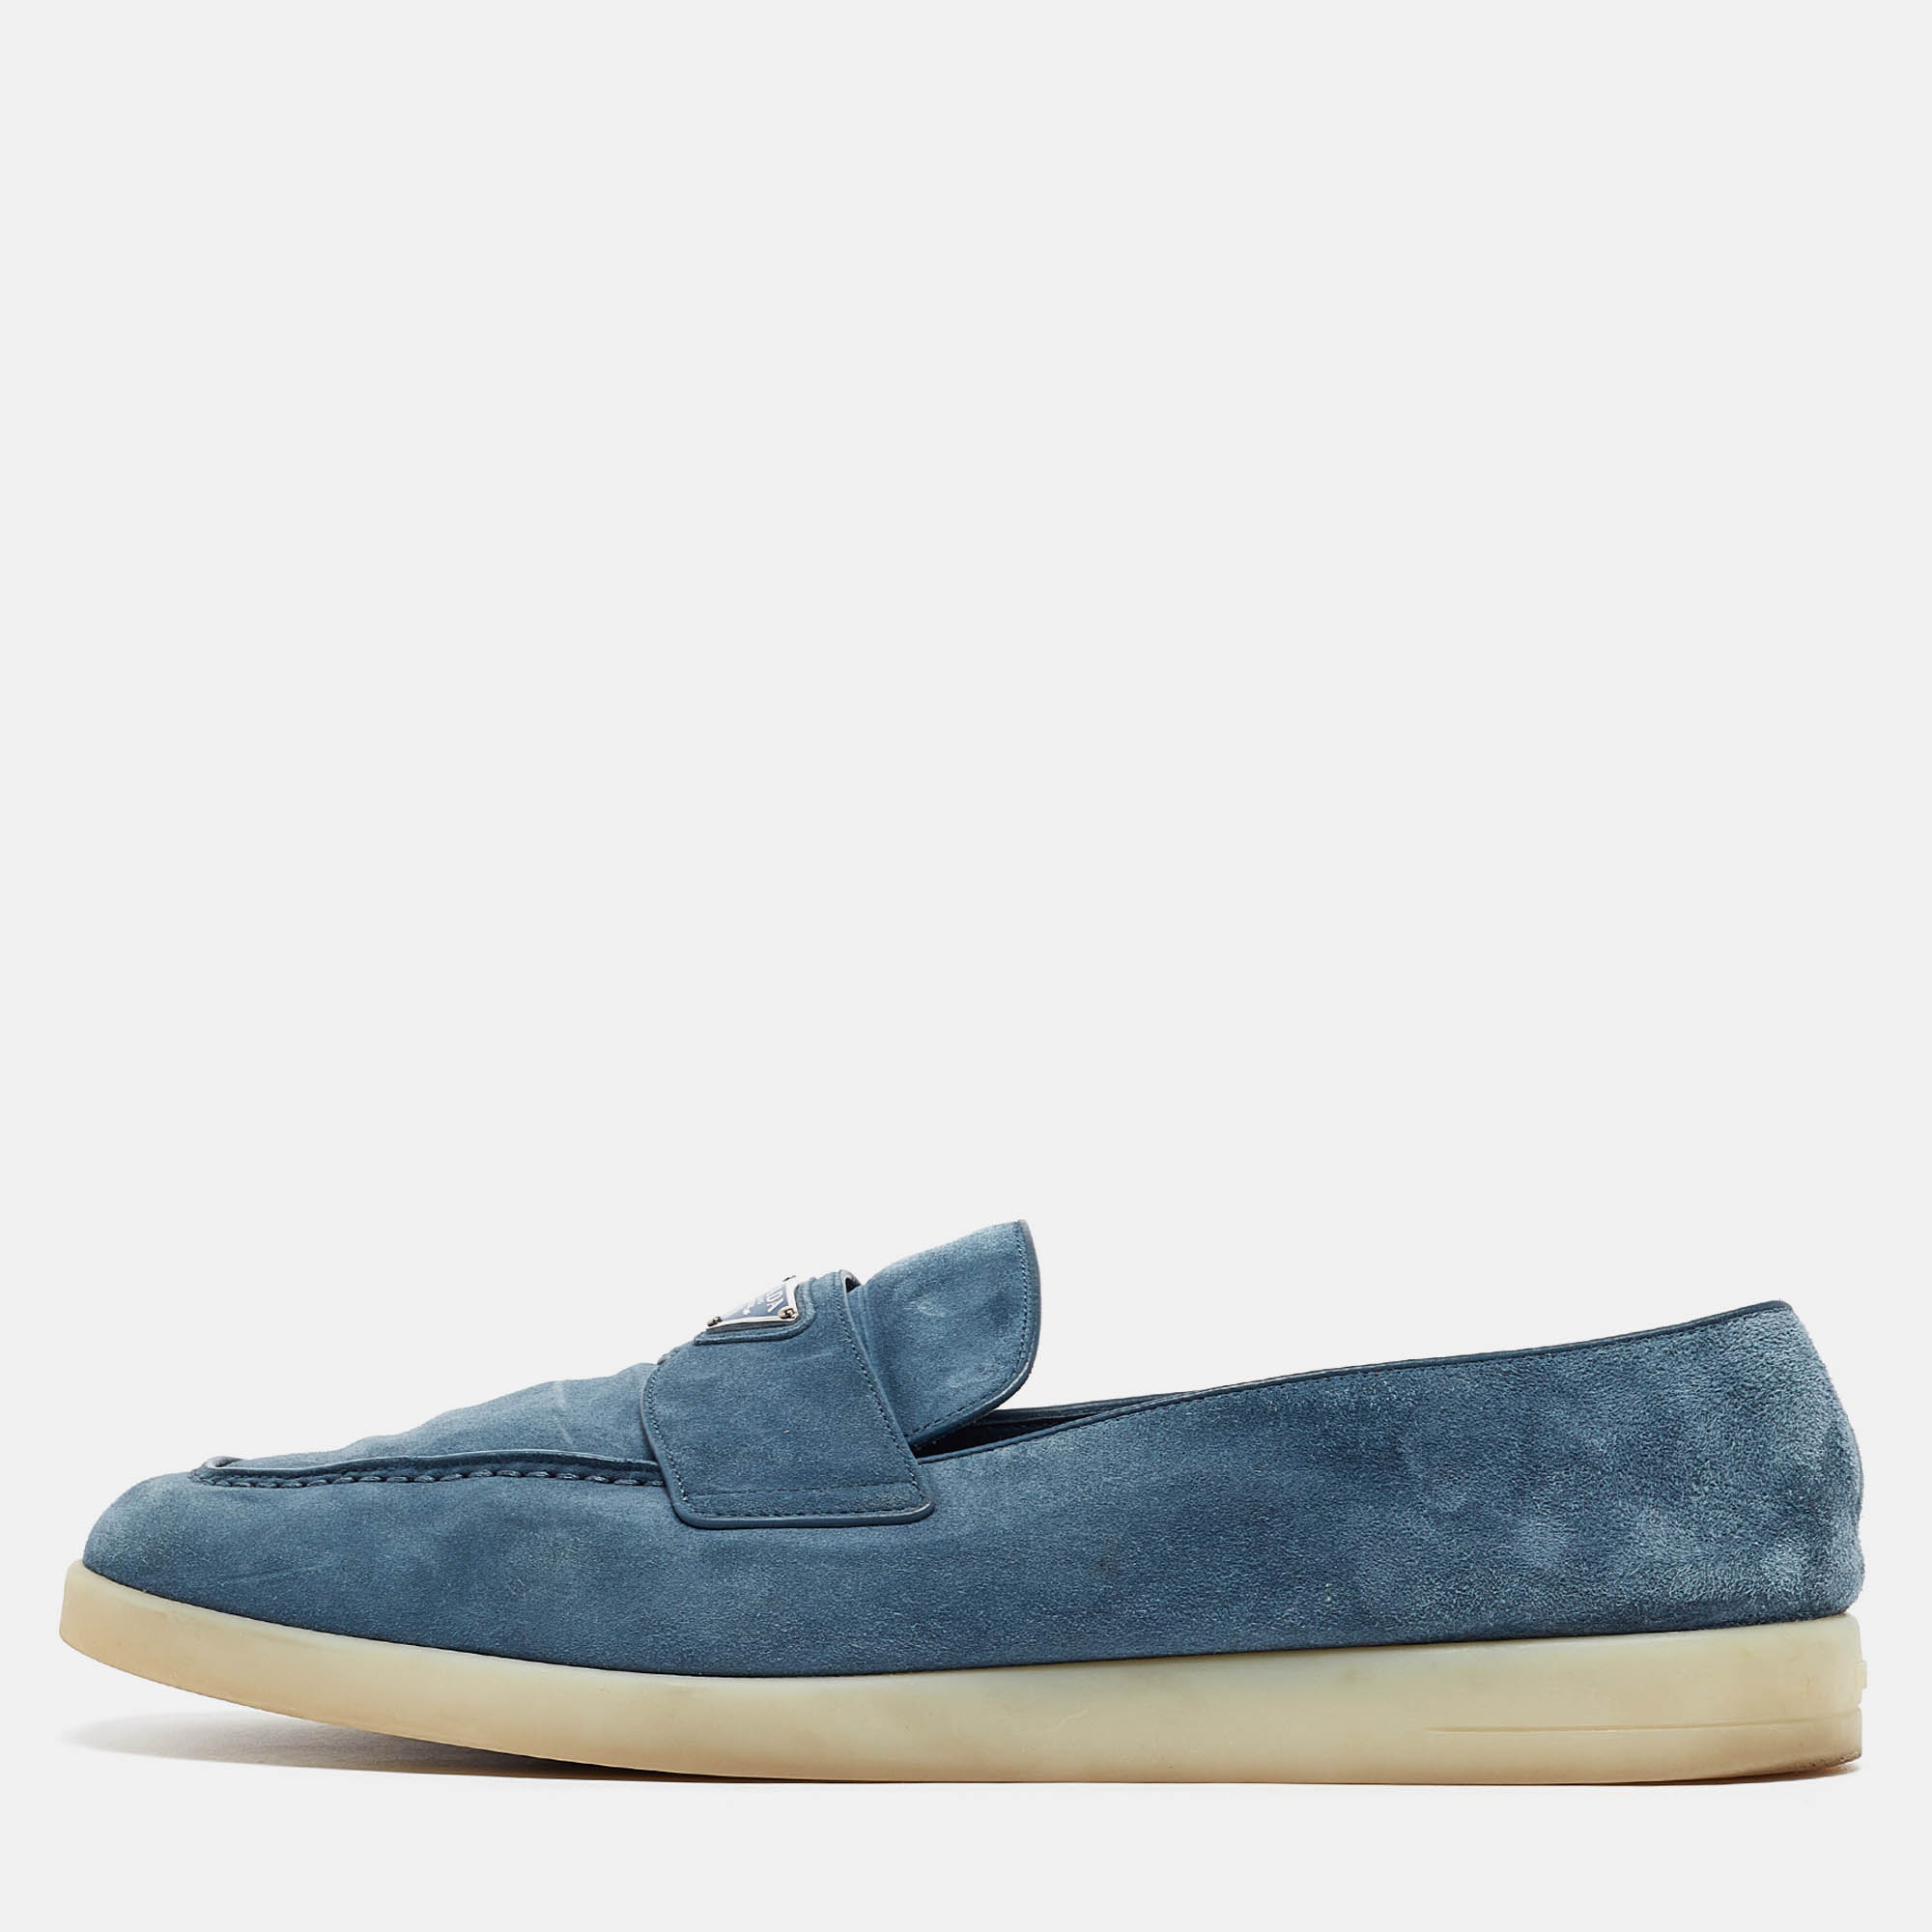 

Prada Blue Suede Slip On Loafers Size 46